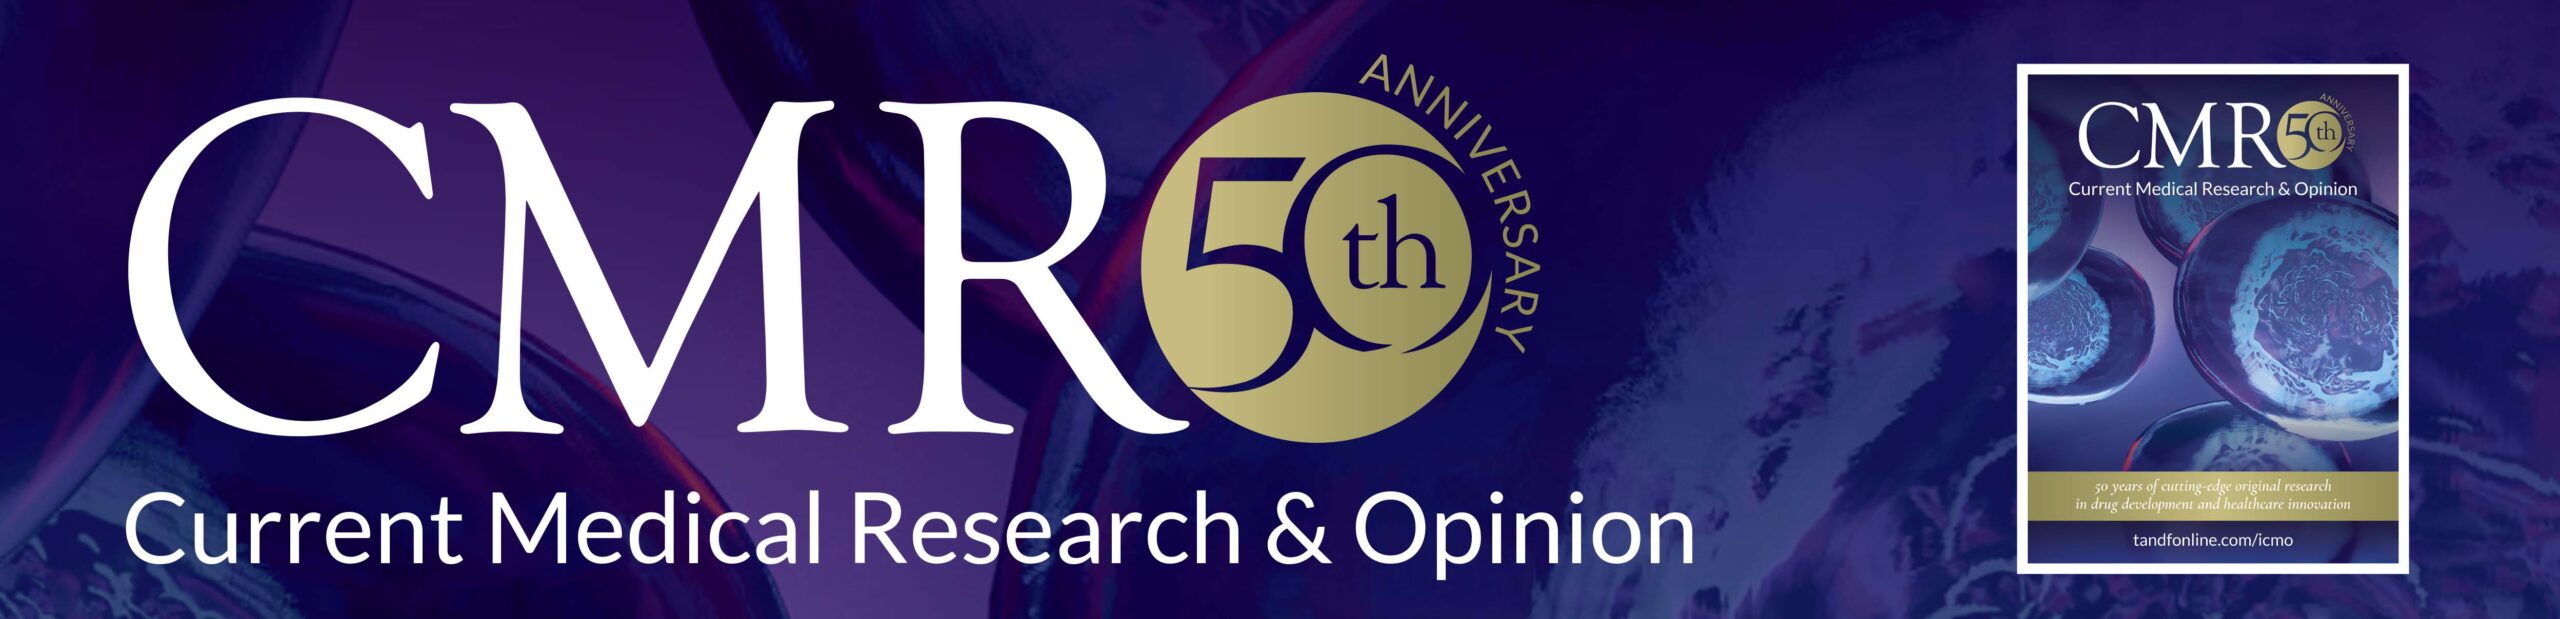 journal current medical research and opinion